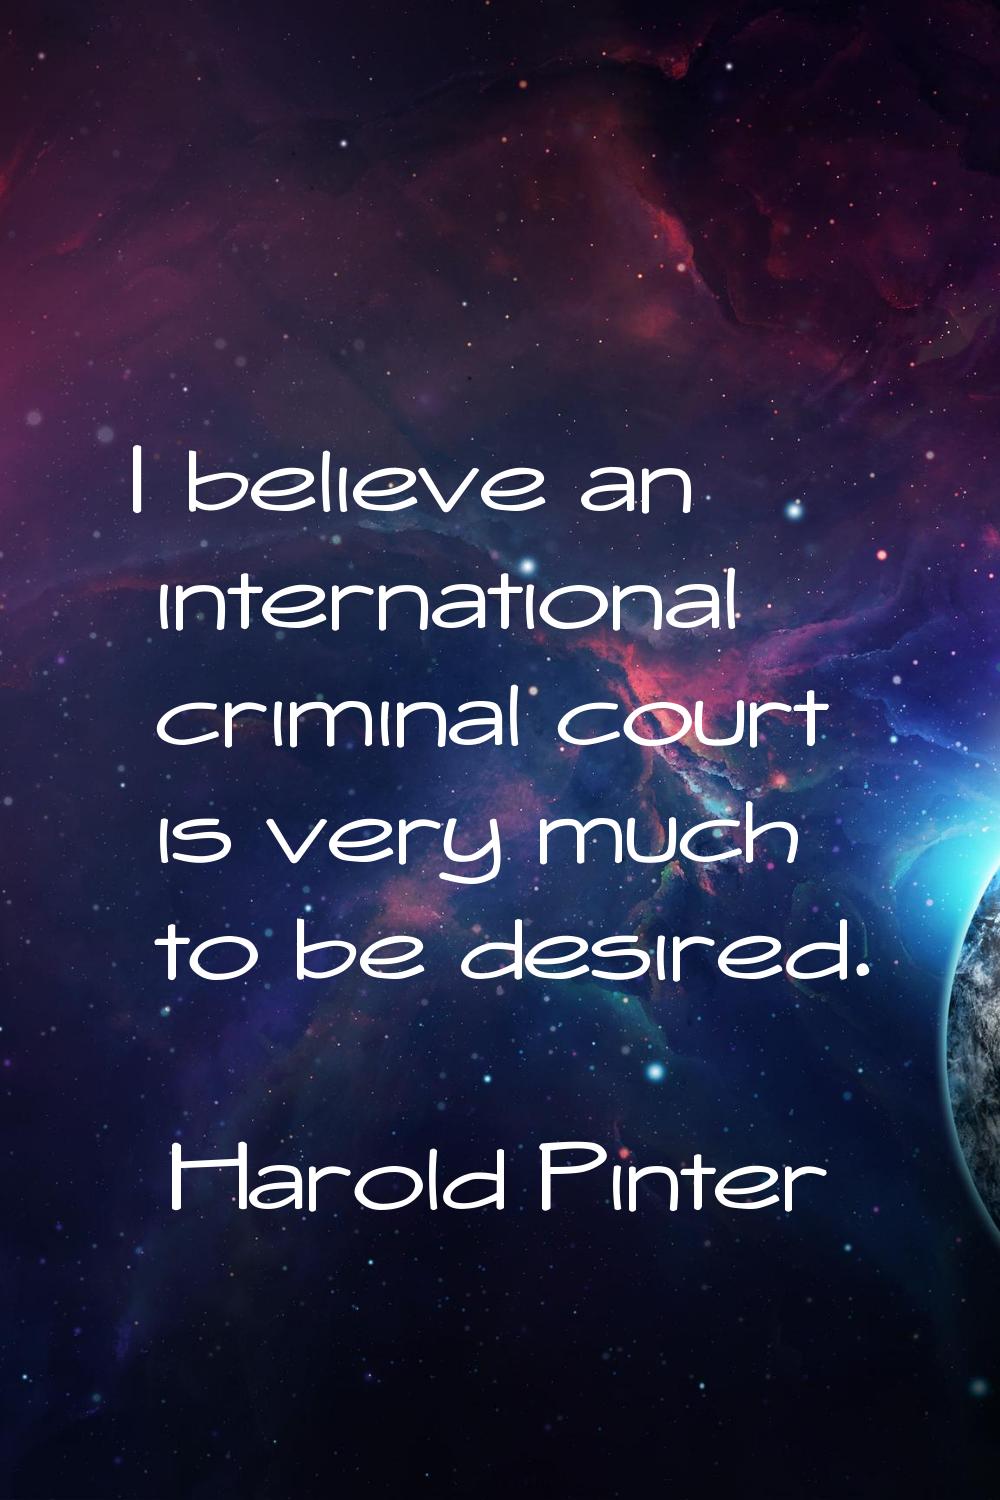 I believe an international criminal court is very much to be desired.